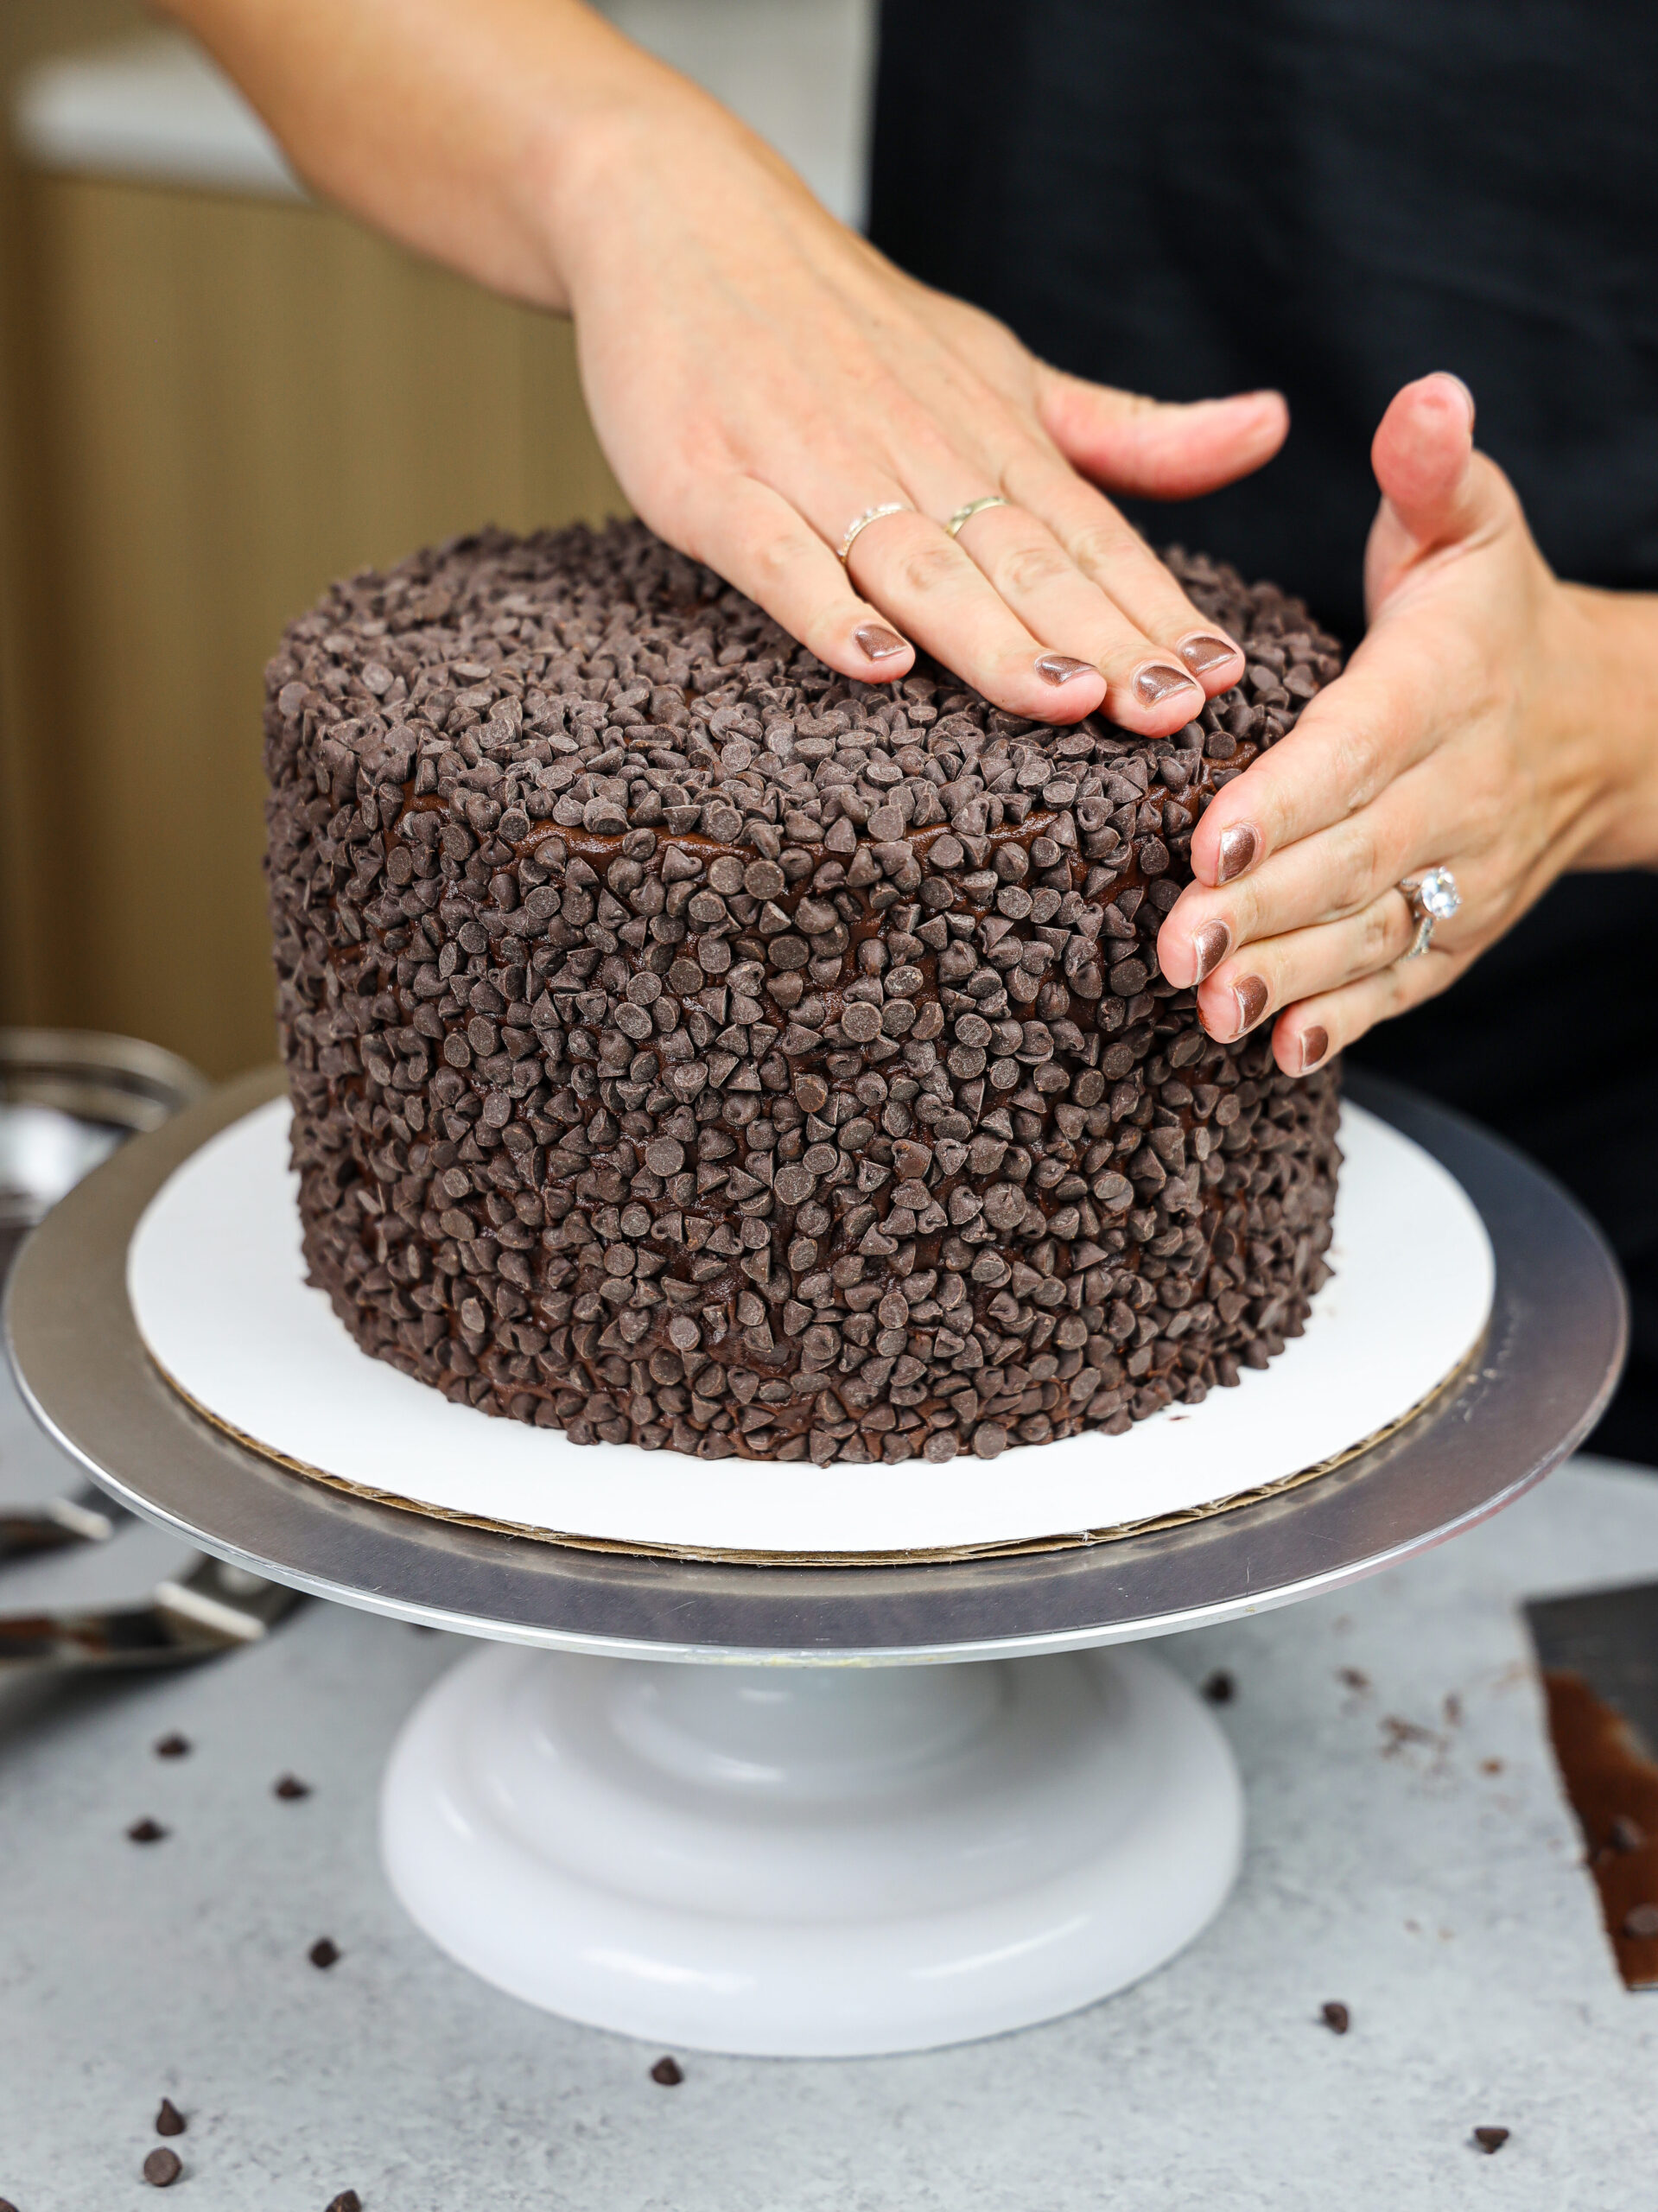 image of a dark chocolate cake being covered with mini chocolate chips